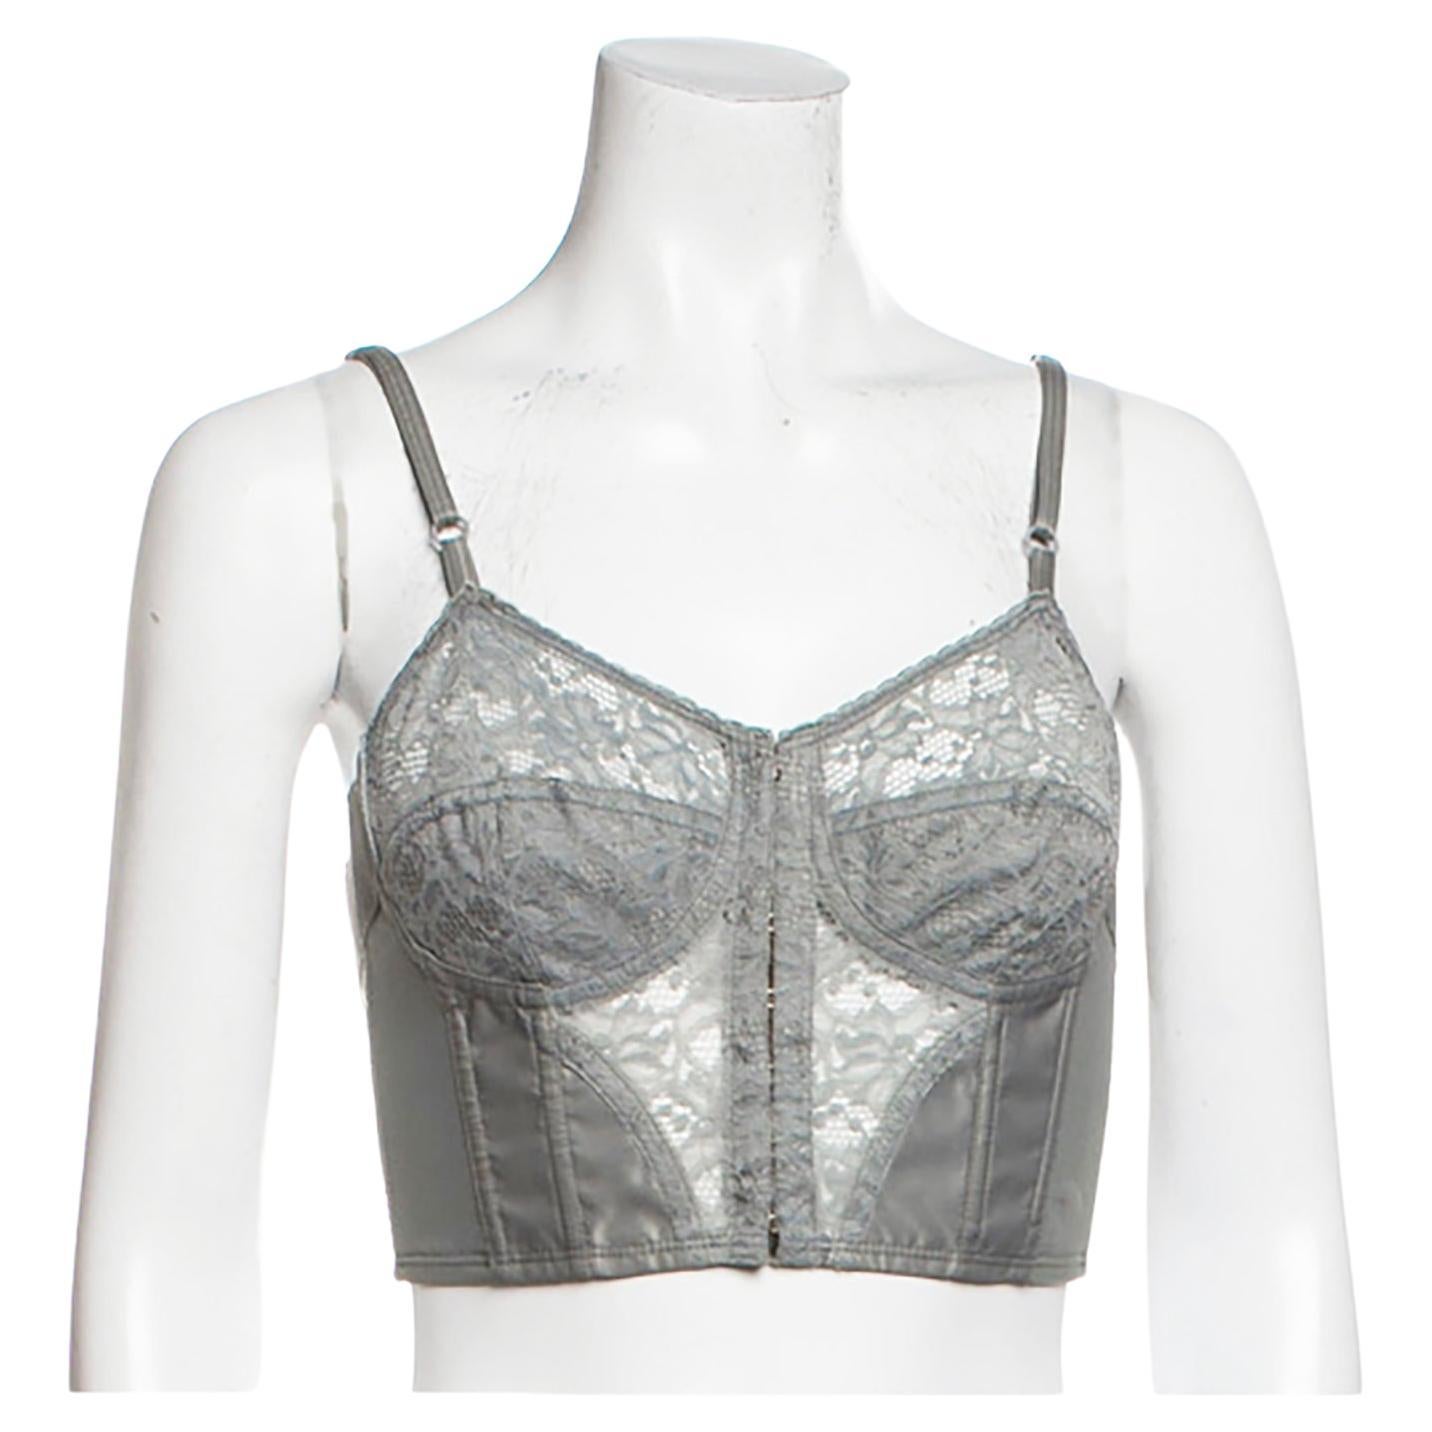 Dolce & Gabbana Grey Lace Crop Top with Hook and Eye Closure at Front